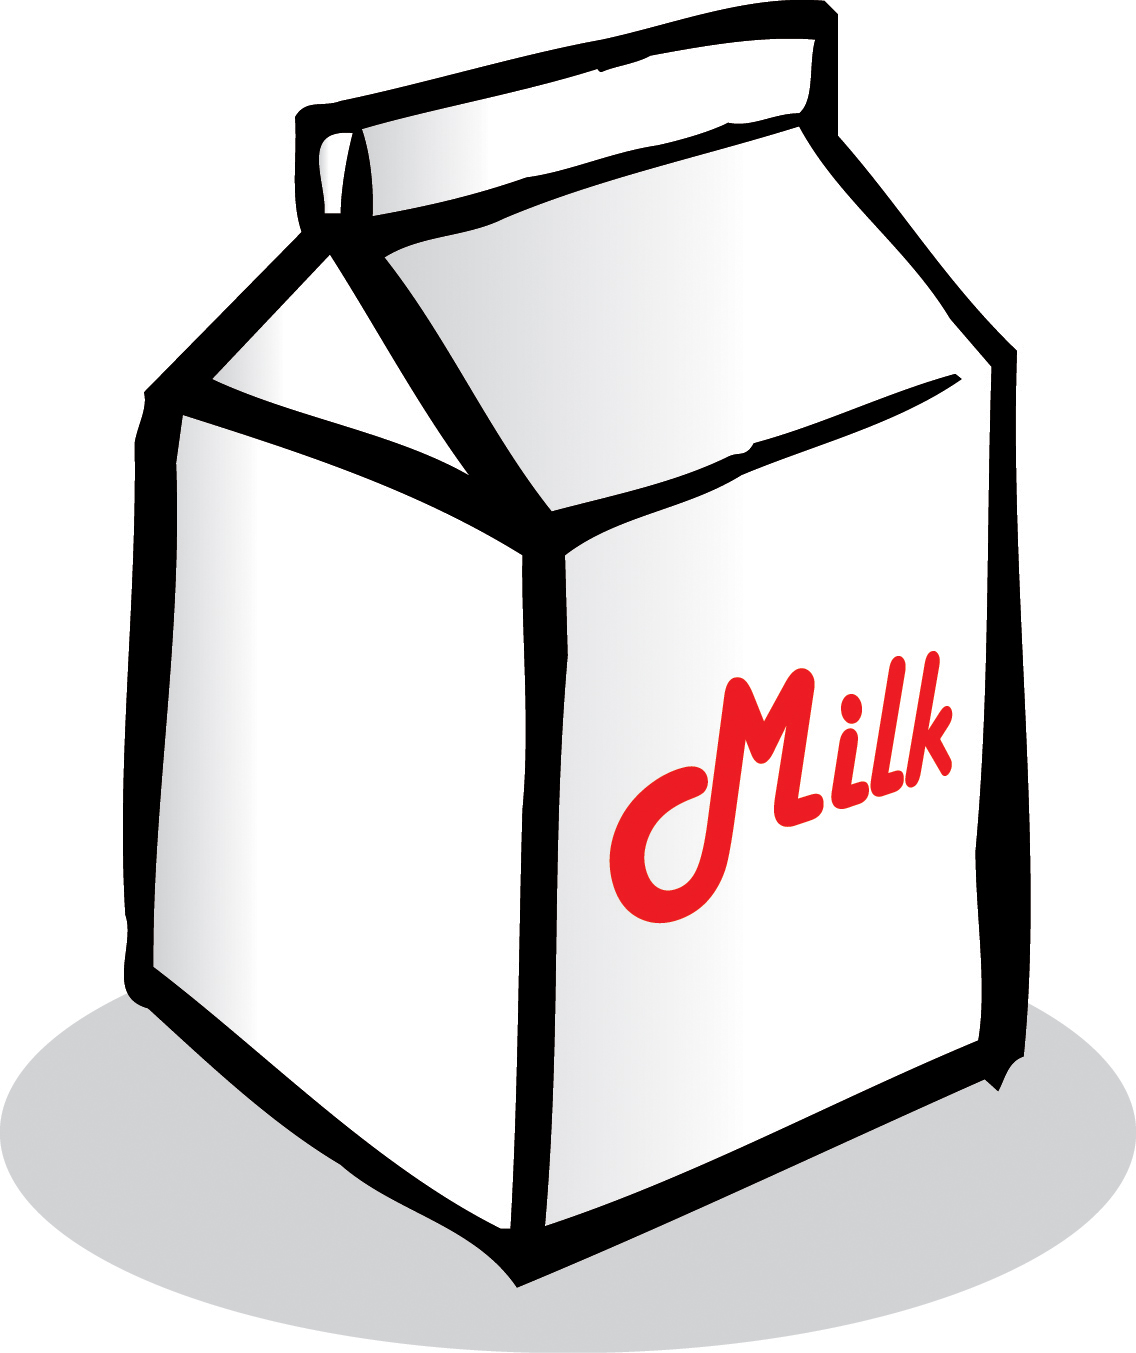 Images For > Clipart Milk